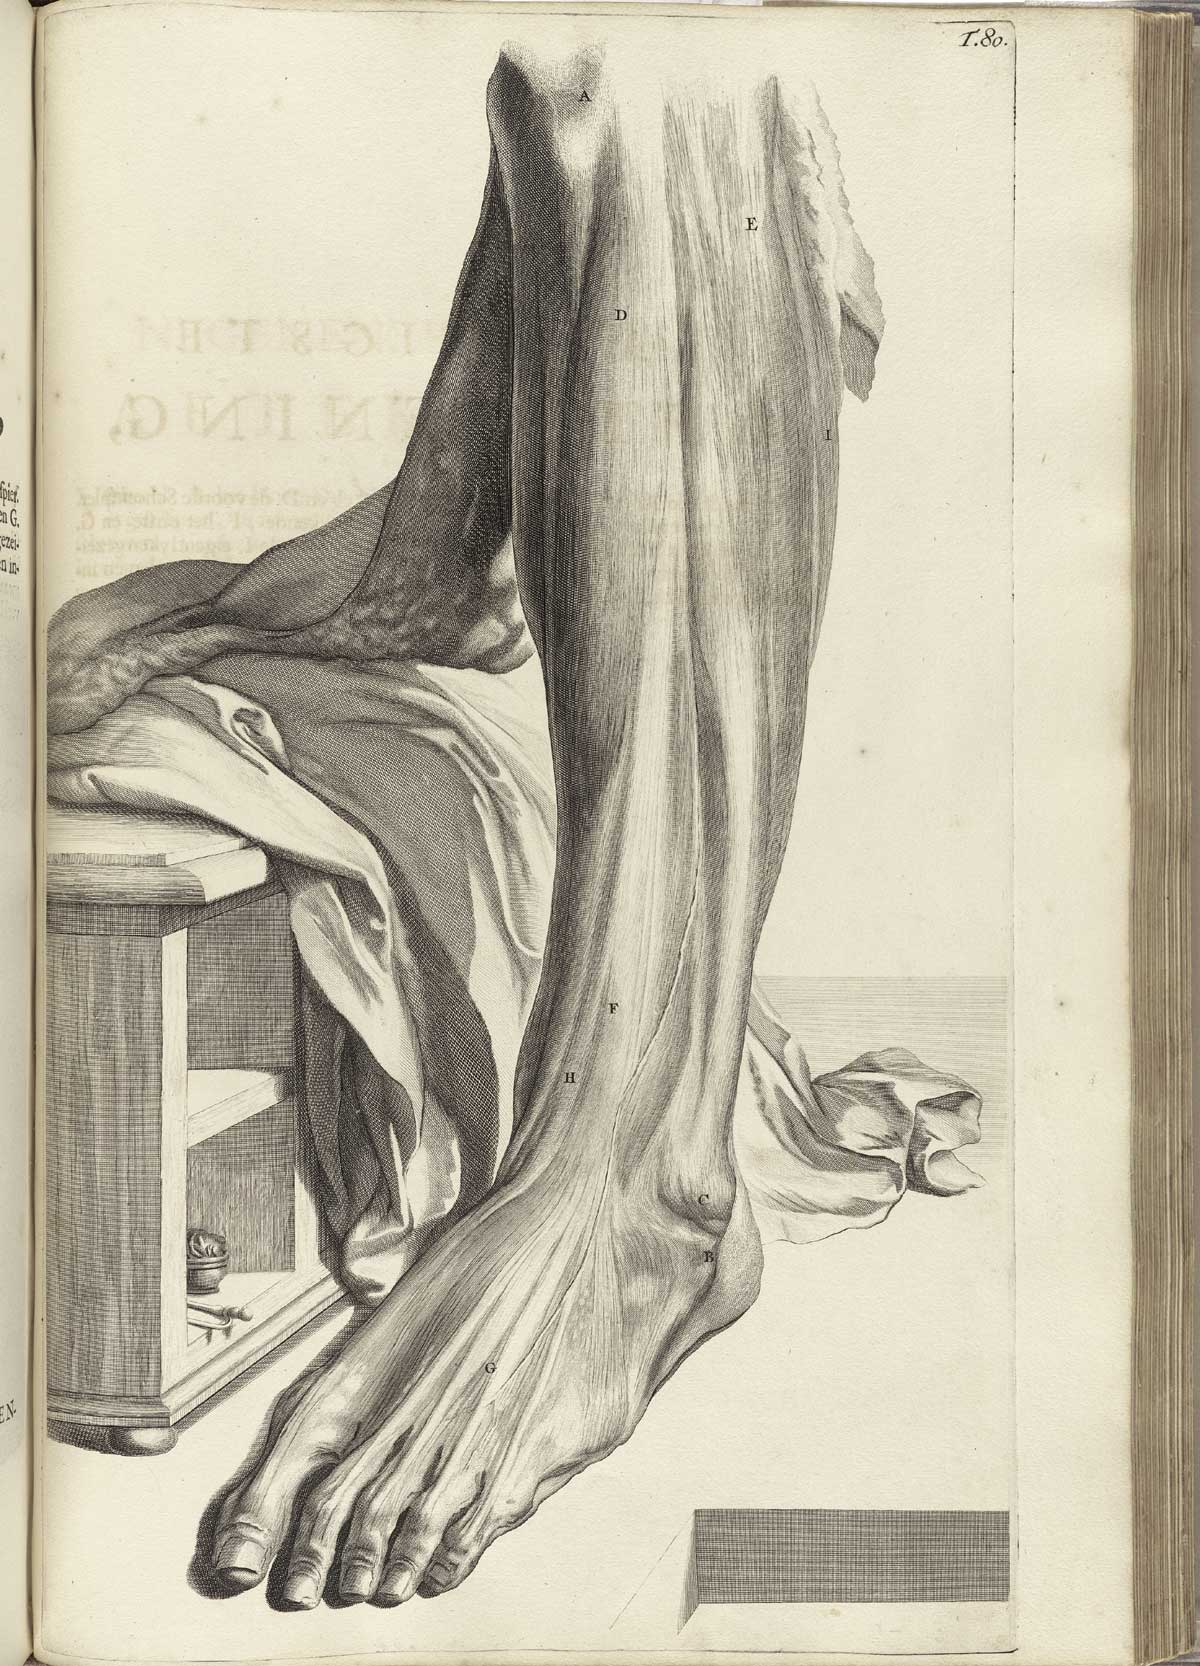 Engraving of a dissected foot and shin with muscles and sinews of the front of the shin and top of the foot separated for a detailed view; leg and foot are presented as if the subject is standing with a draped sheet and wooden box just to the left; from Govard Bidloo’s Ontleding Des Menschelyken Lichaams, Amsterdam, 1690, NLM Call no. WZ 250 B5855anDu 1690.